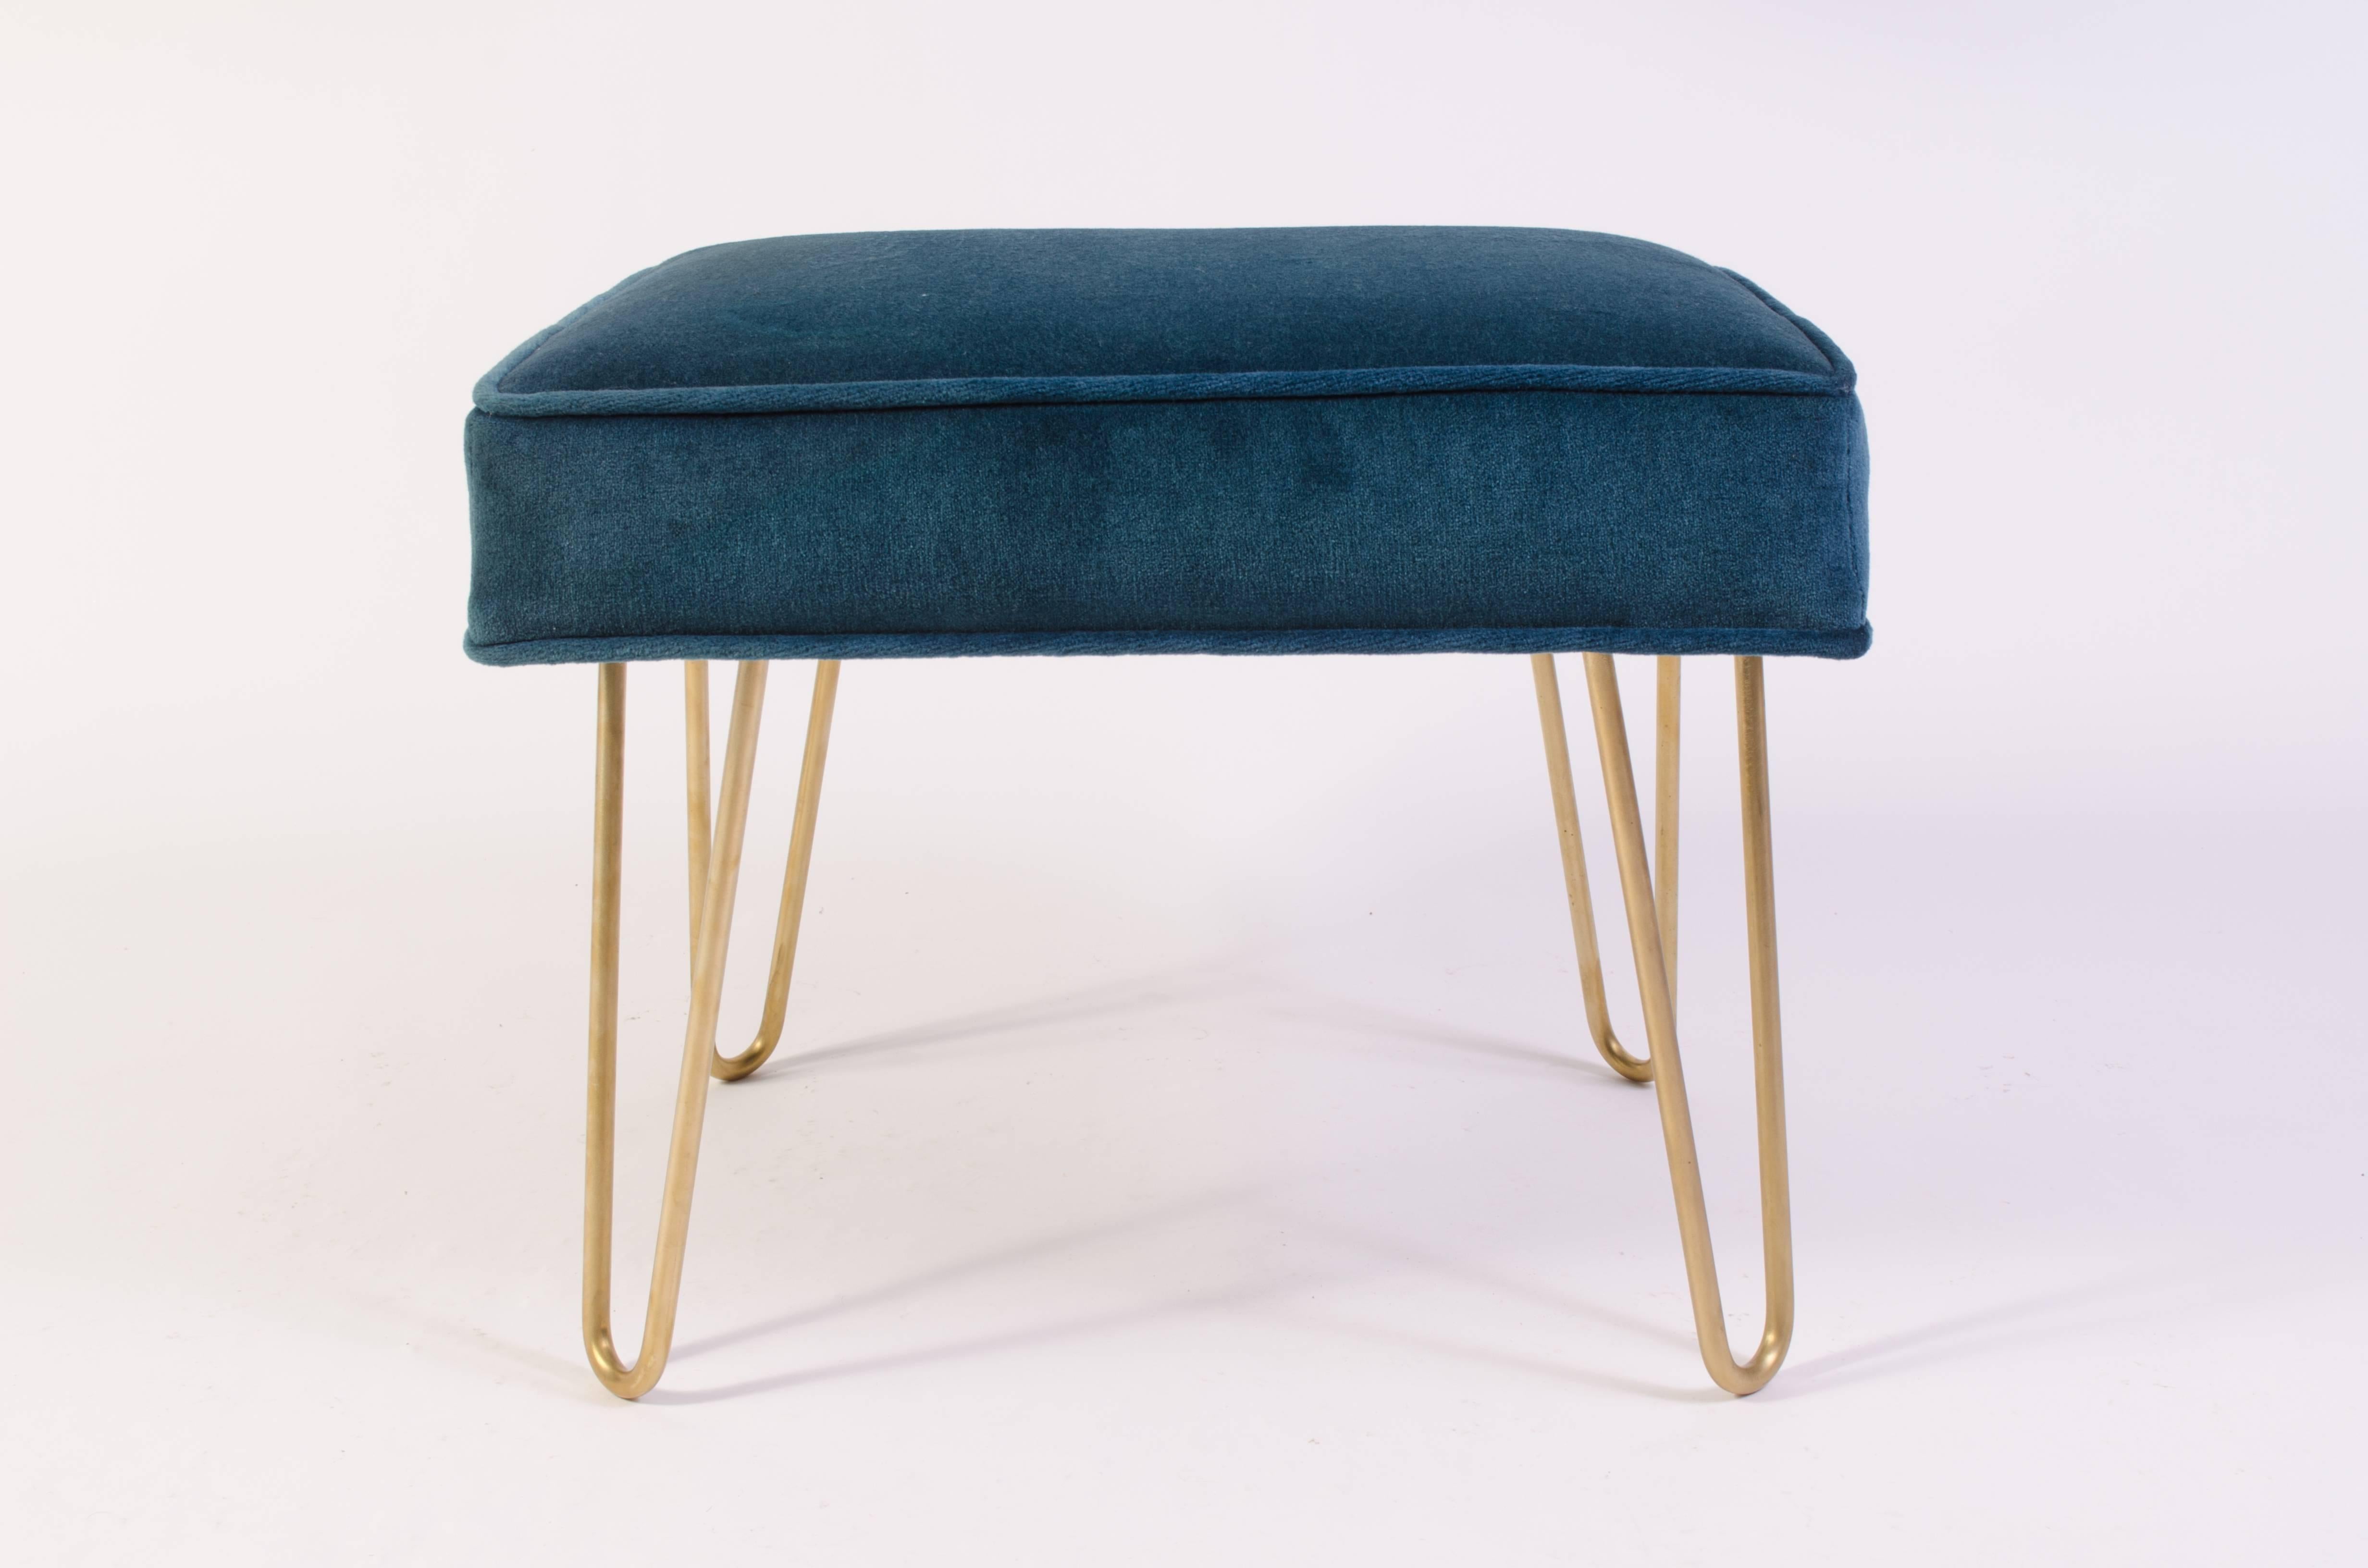 The perfect addition to any space! Wonderfully proportioned pair of ottomans upholstered in a supple Teal Velvet of the highest quality; 100% cotton. These work in a multitude of spaces: in a living space, under a console, at the foot of a bed.